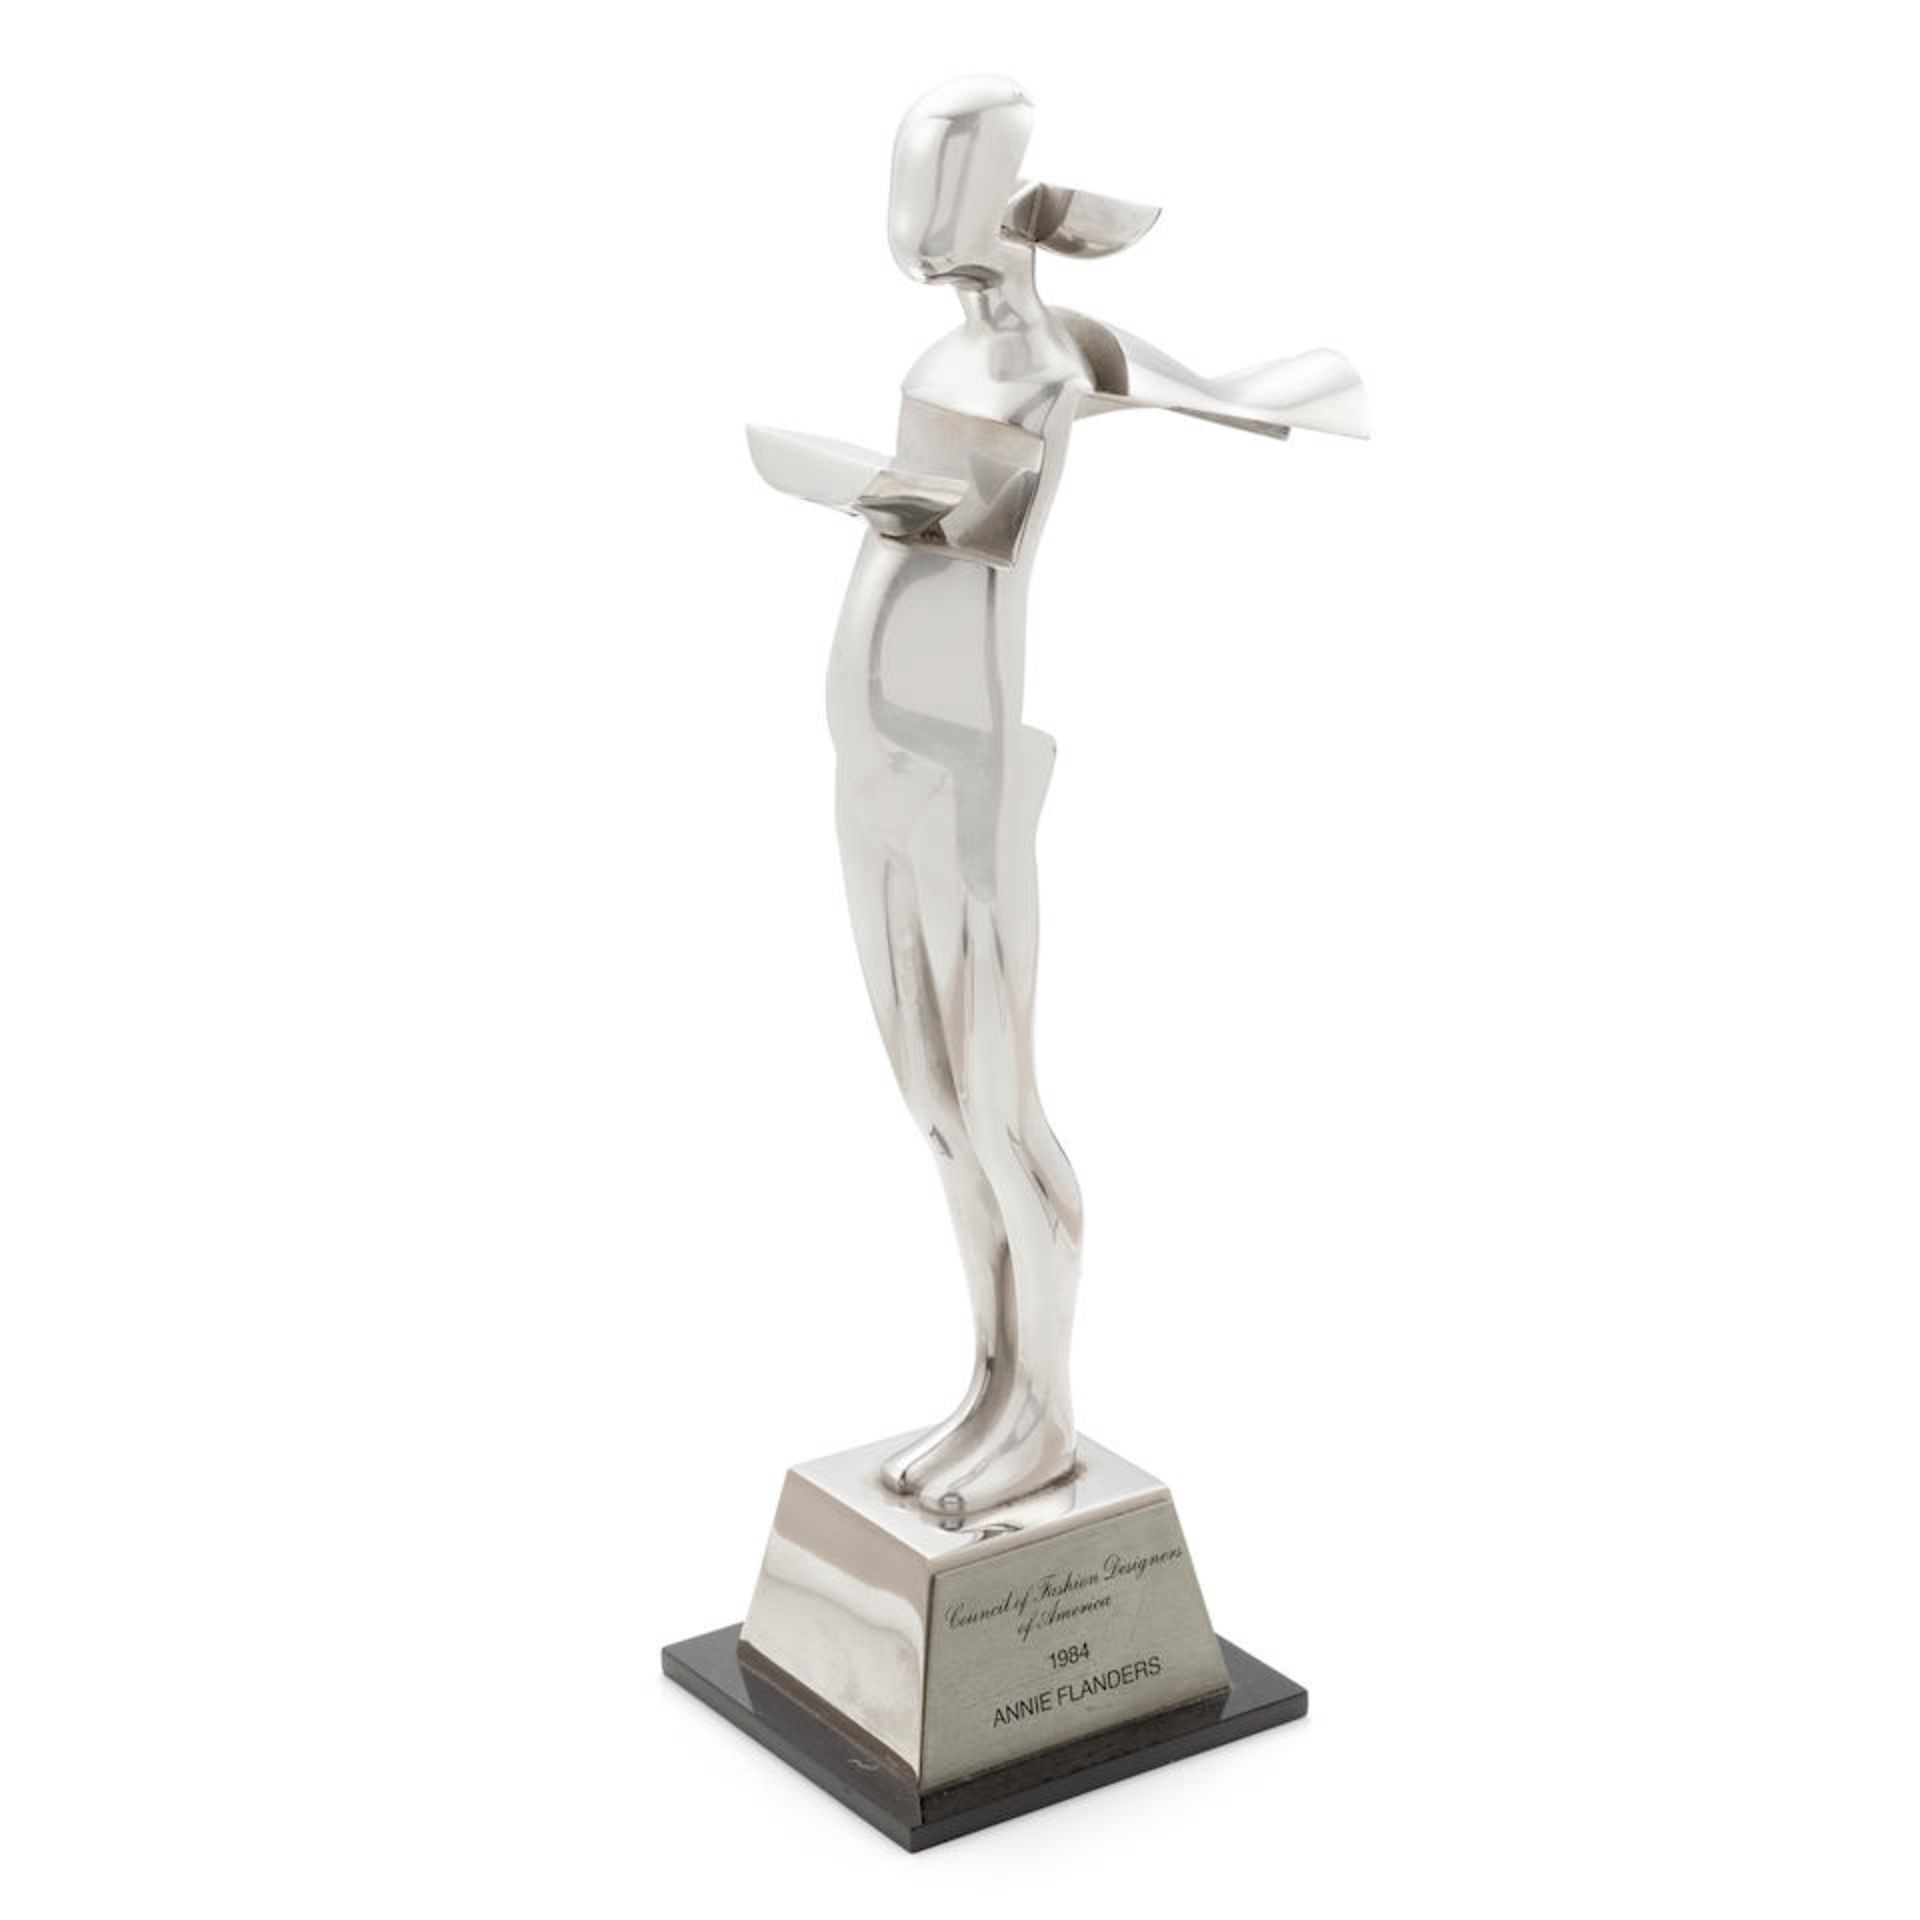 AN ANNIE FLANDERS 1984 CFDA AWARD STATUETTE. TROVA, ERNEST, after. Stainless steel statuette on ...